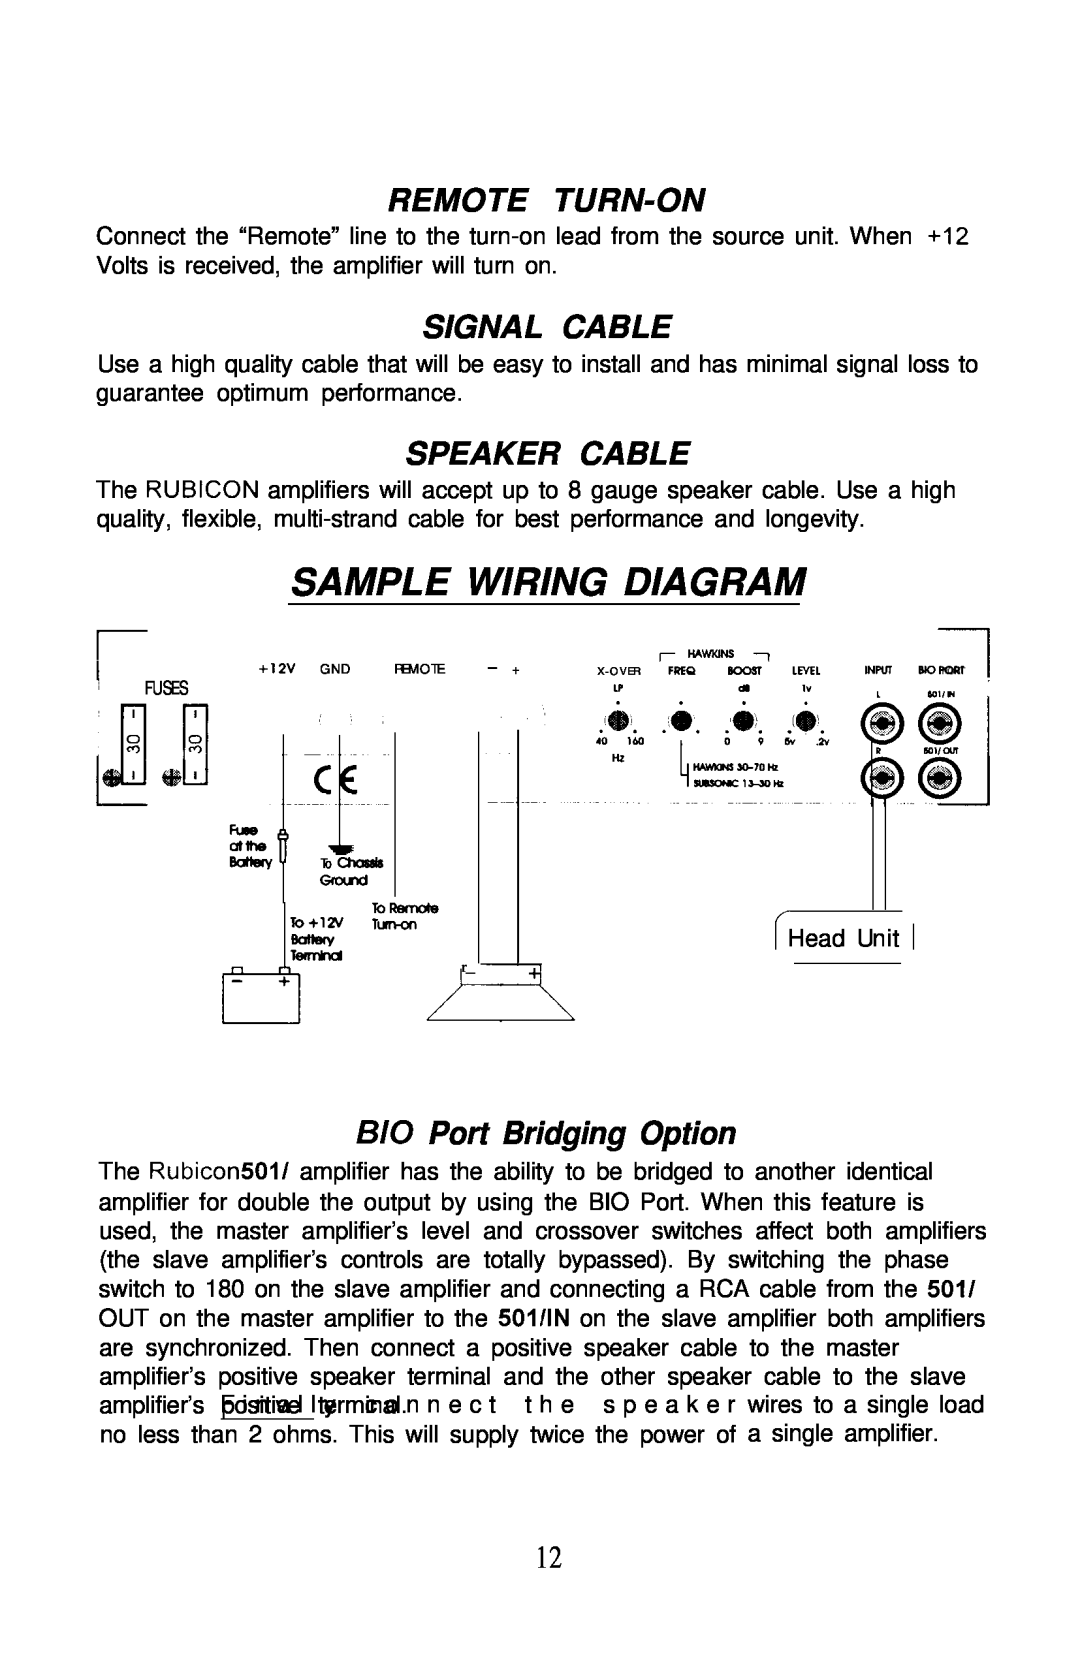 Soundstream Technologies 501 Sample Wiring Diagram, Remote Turn-On, Signal Cable, Speaker Cable, B/O Port Bridging Option 